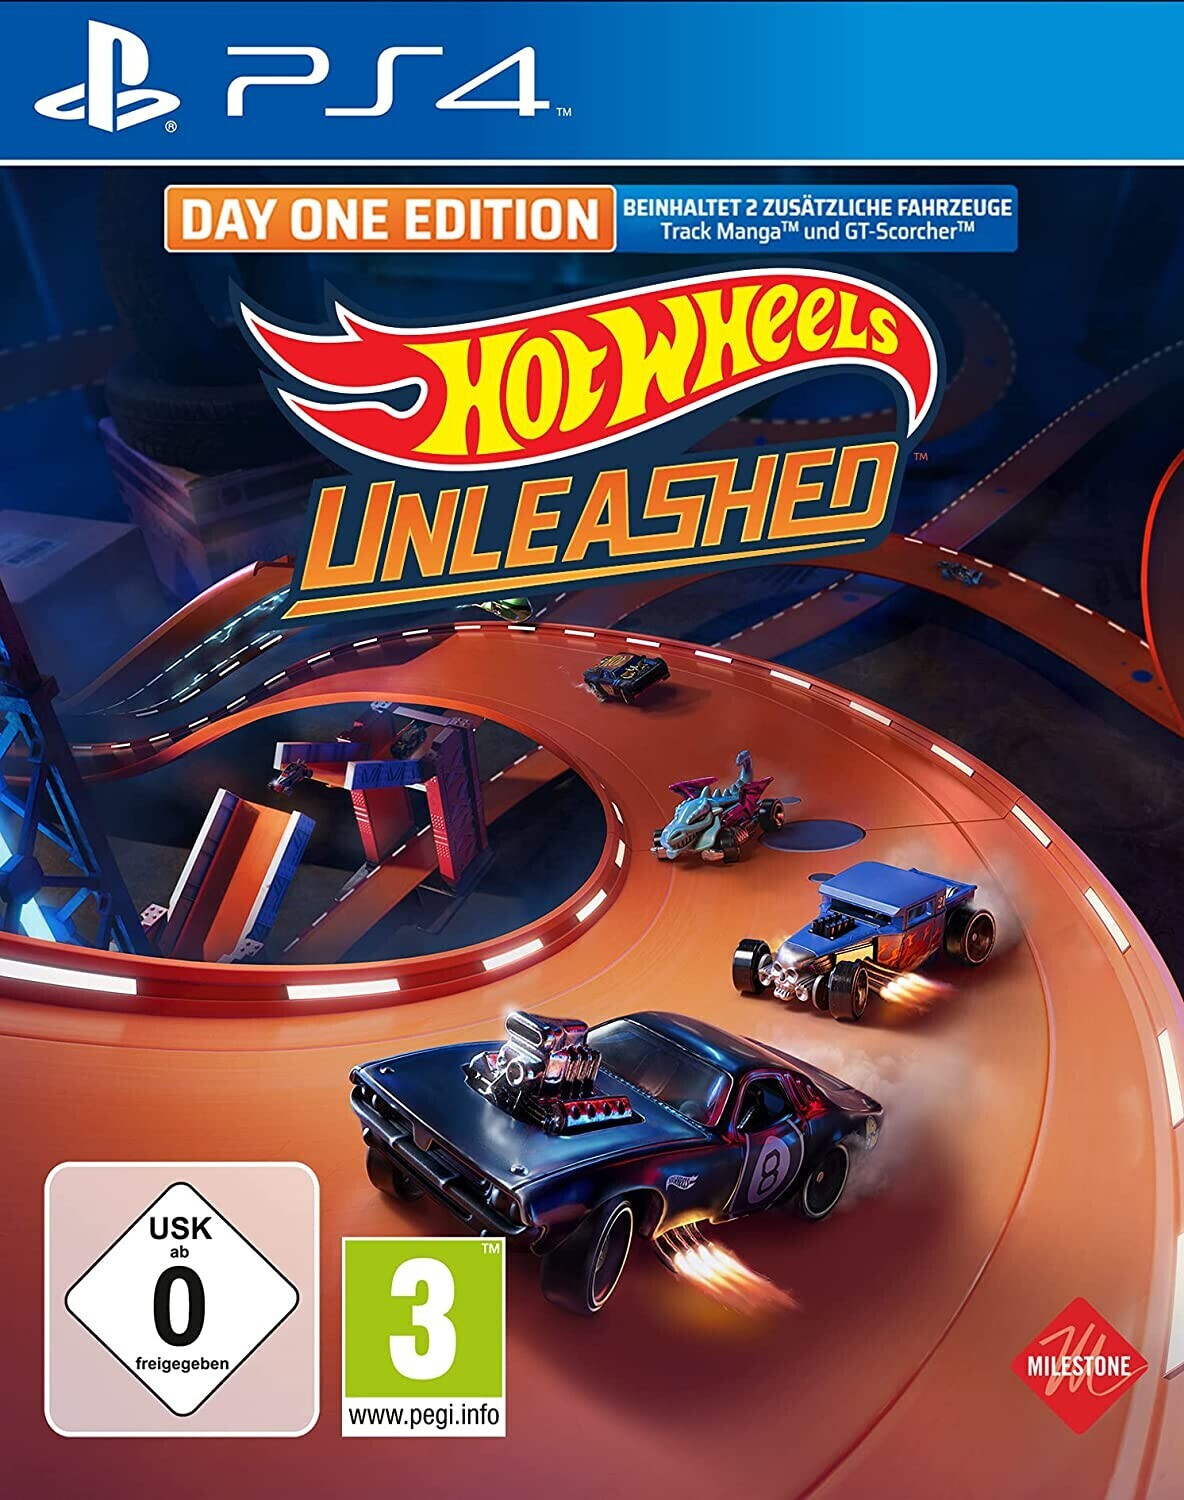 hot wheels unleashed xbox game pass